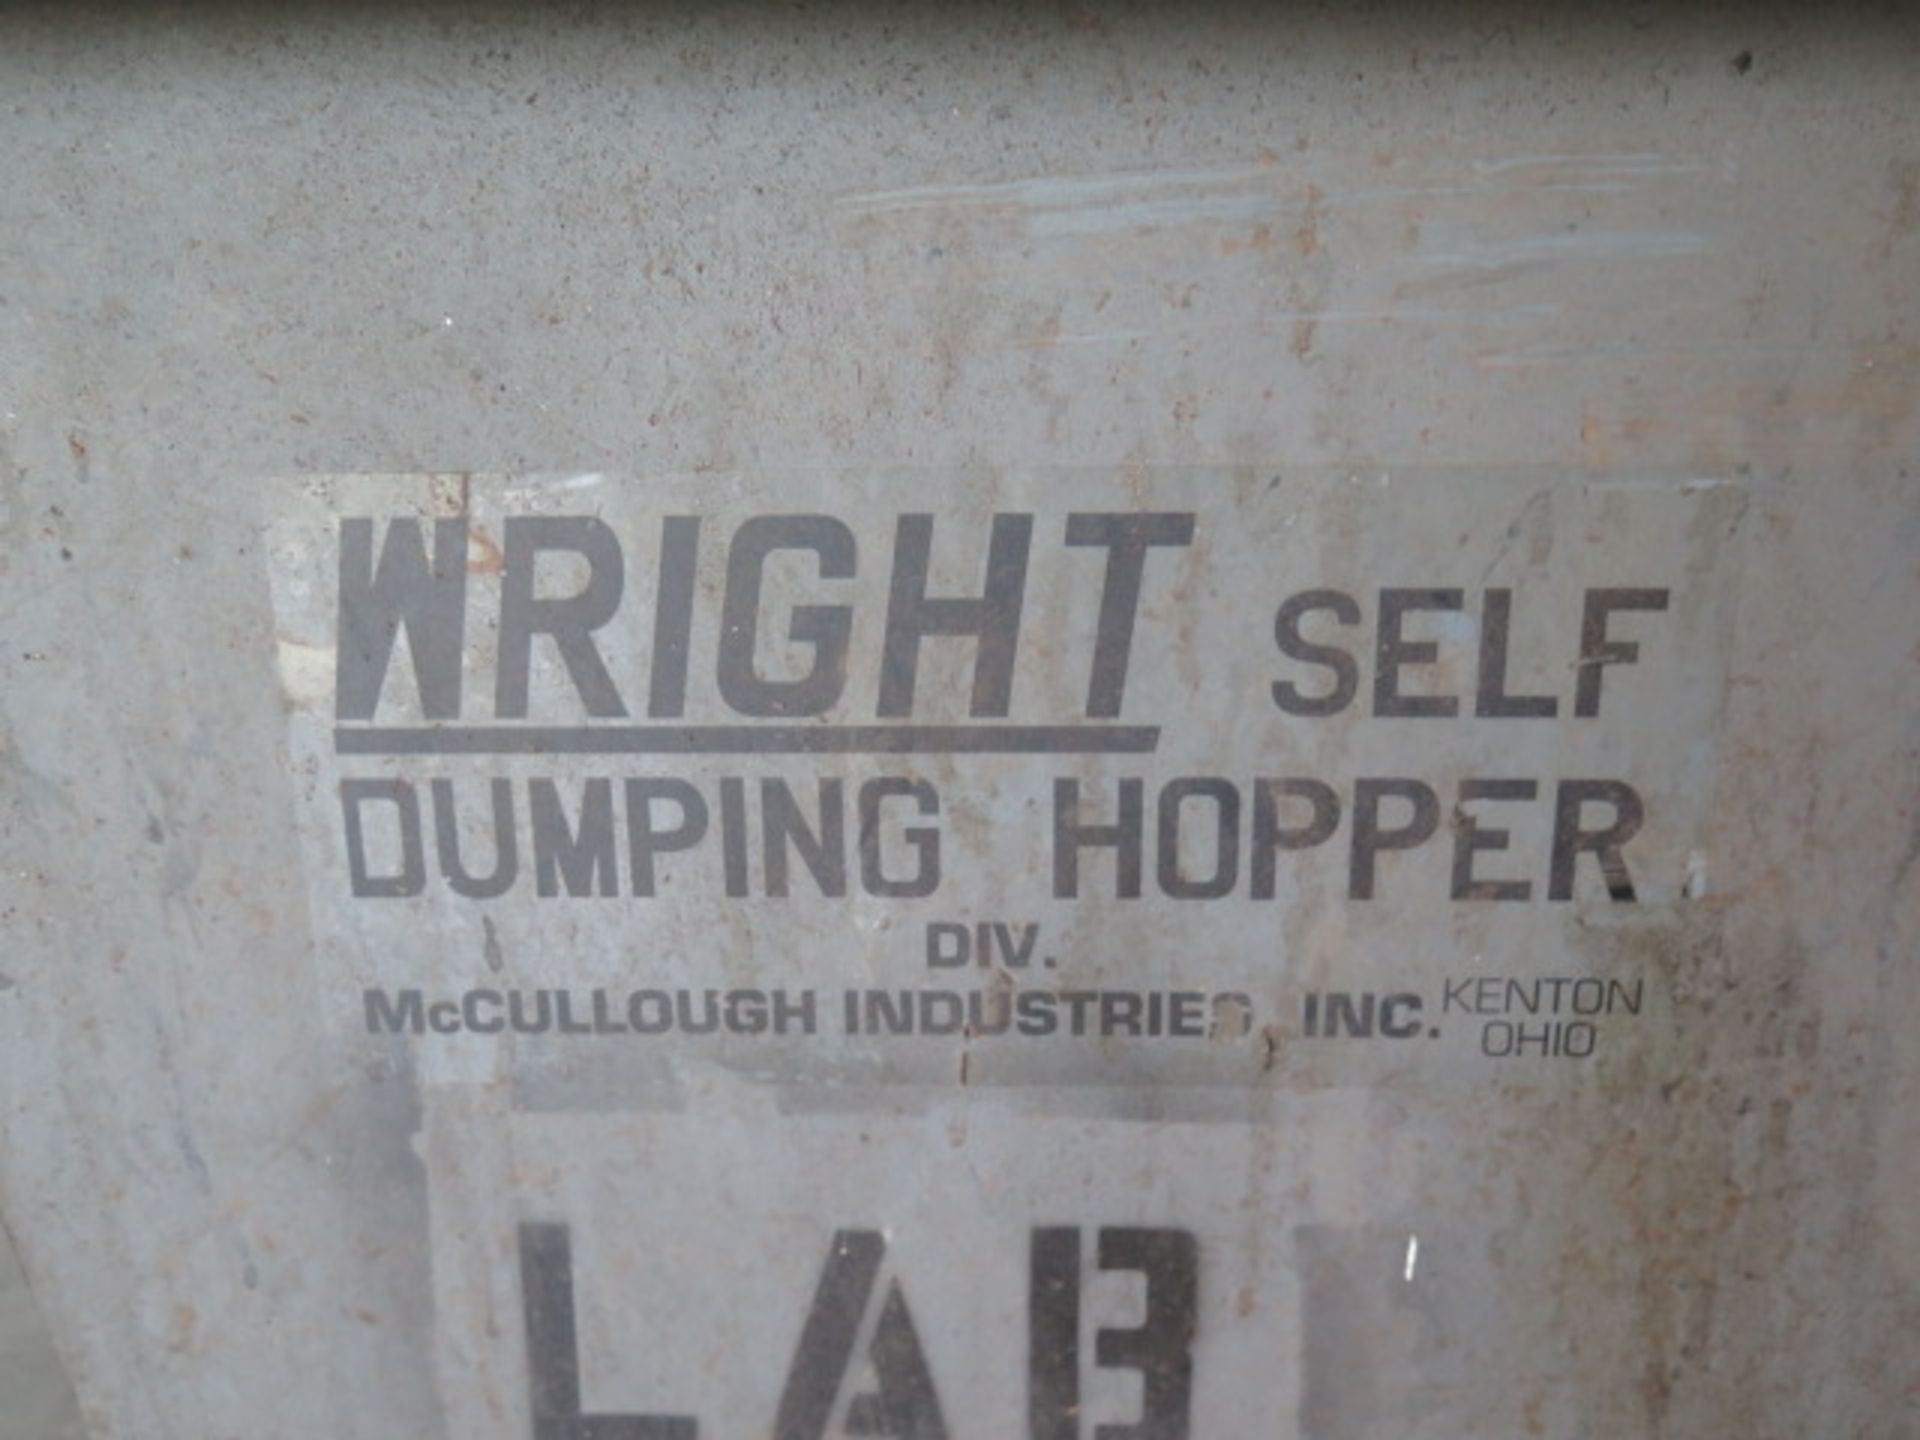 Wright Self Dumping Hoppers (2) (SOLD AS-IS - NO WARRANTY) - Image 5 of 5